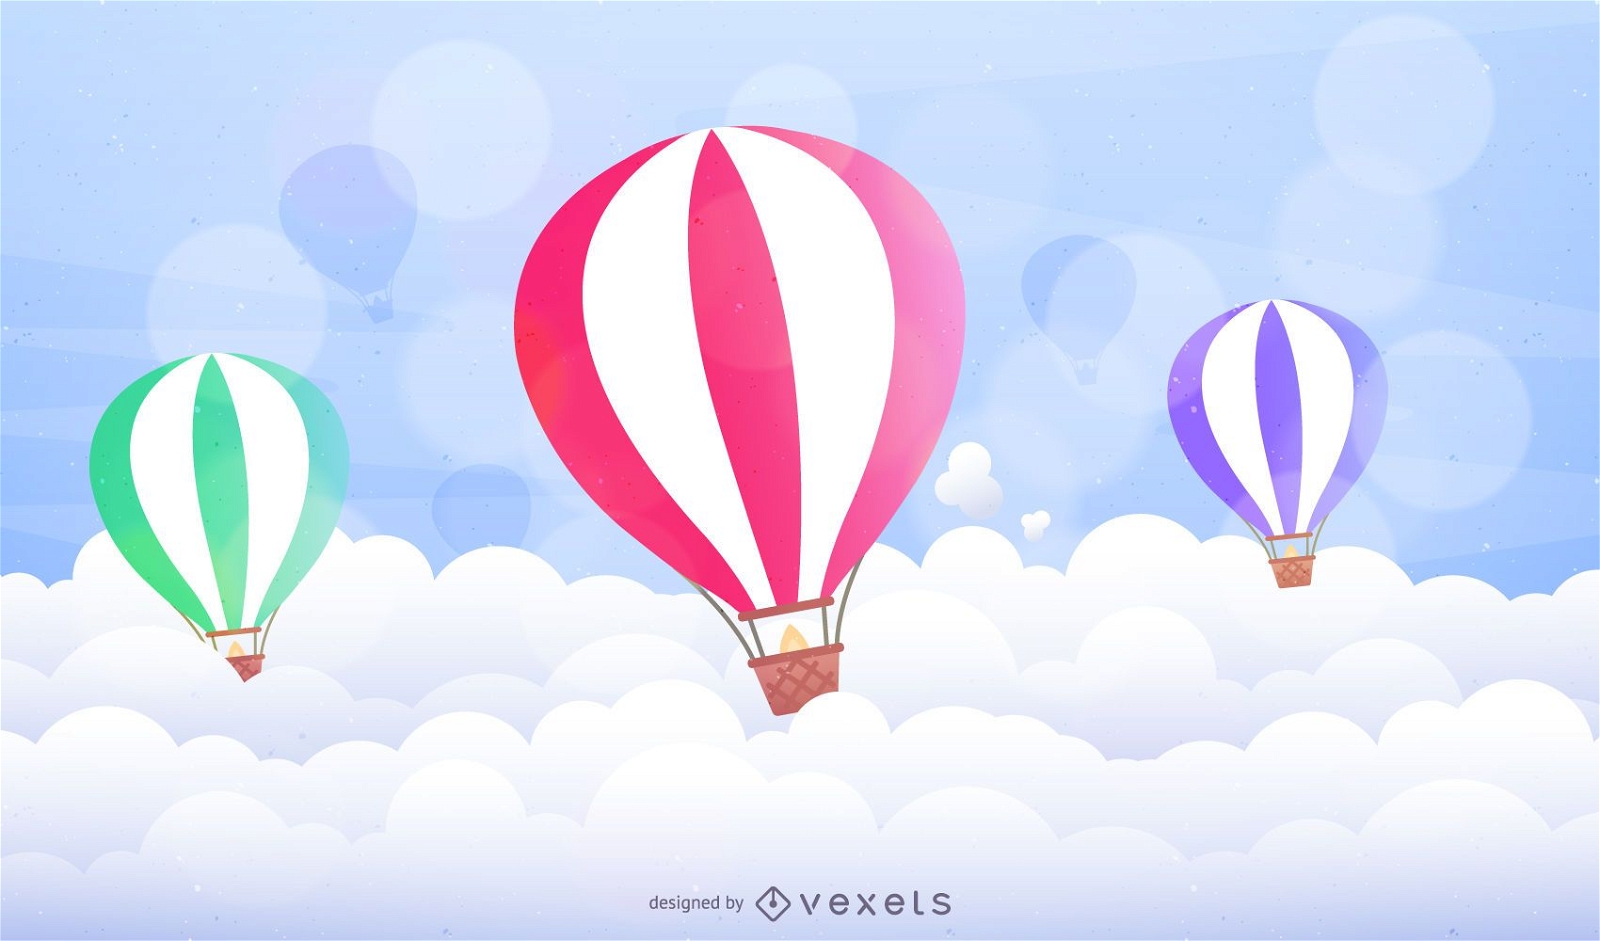 Illustrated hot air balloons over clouds